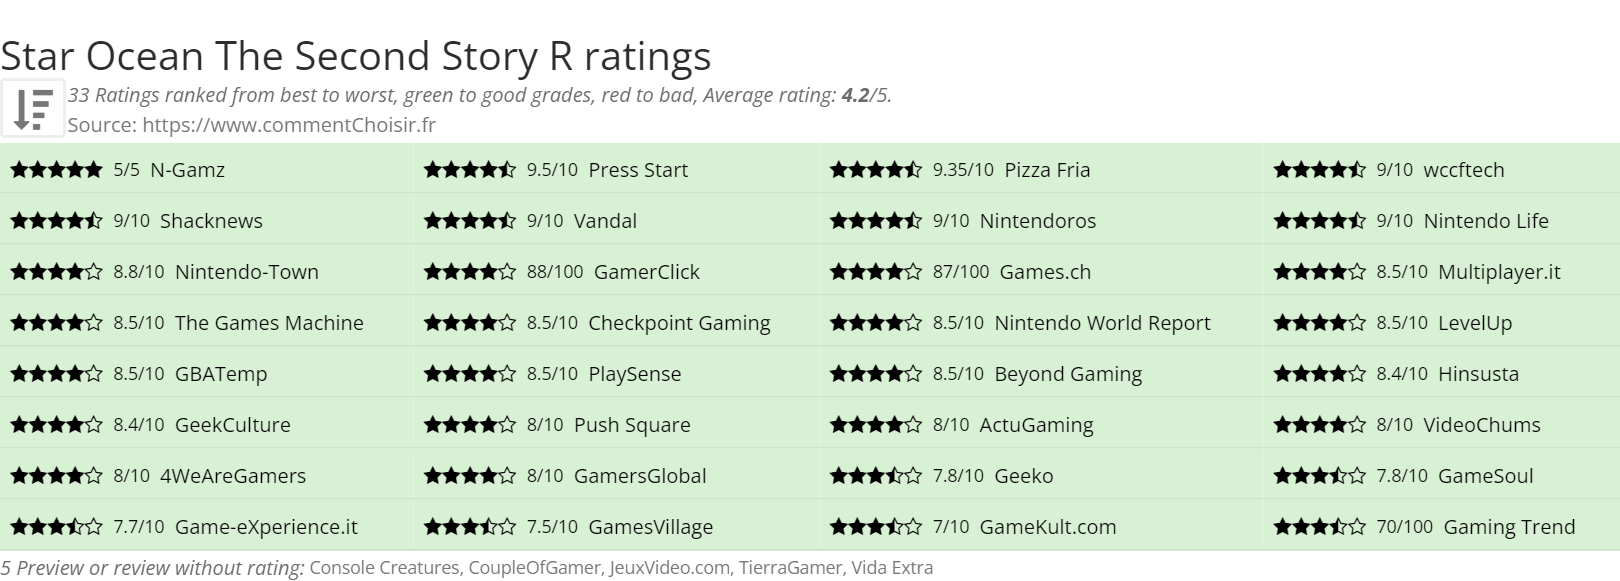 Ratings Star Ocean The Second Story R